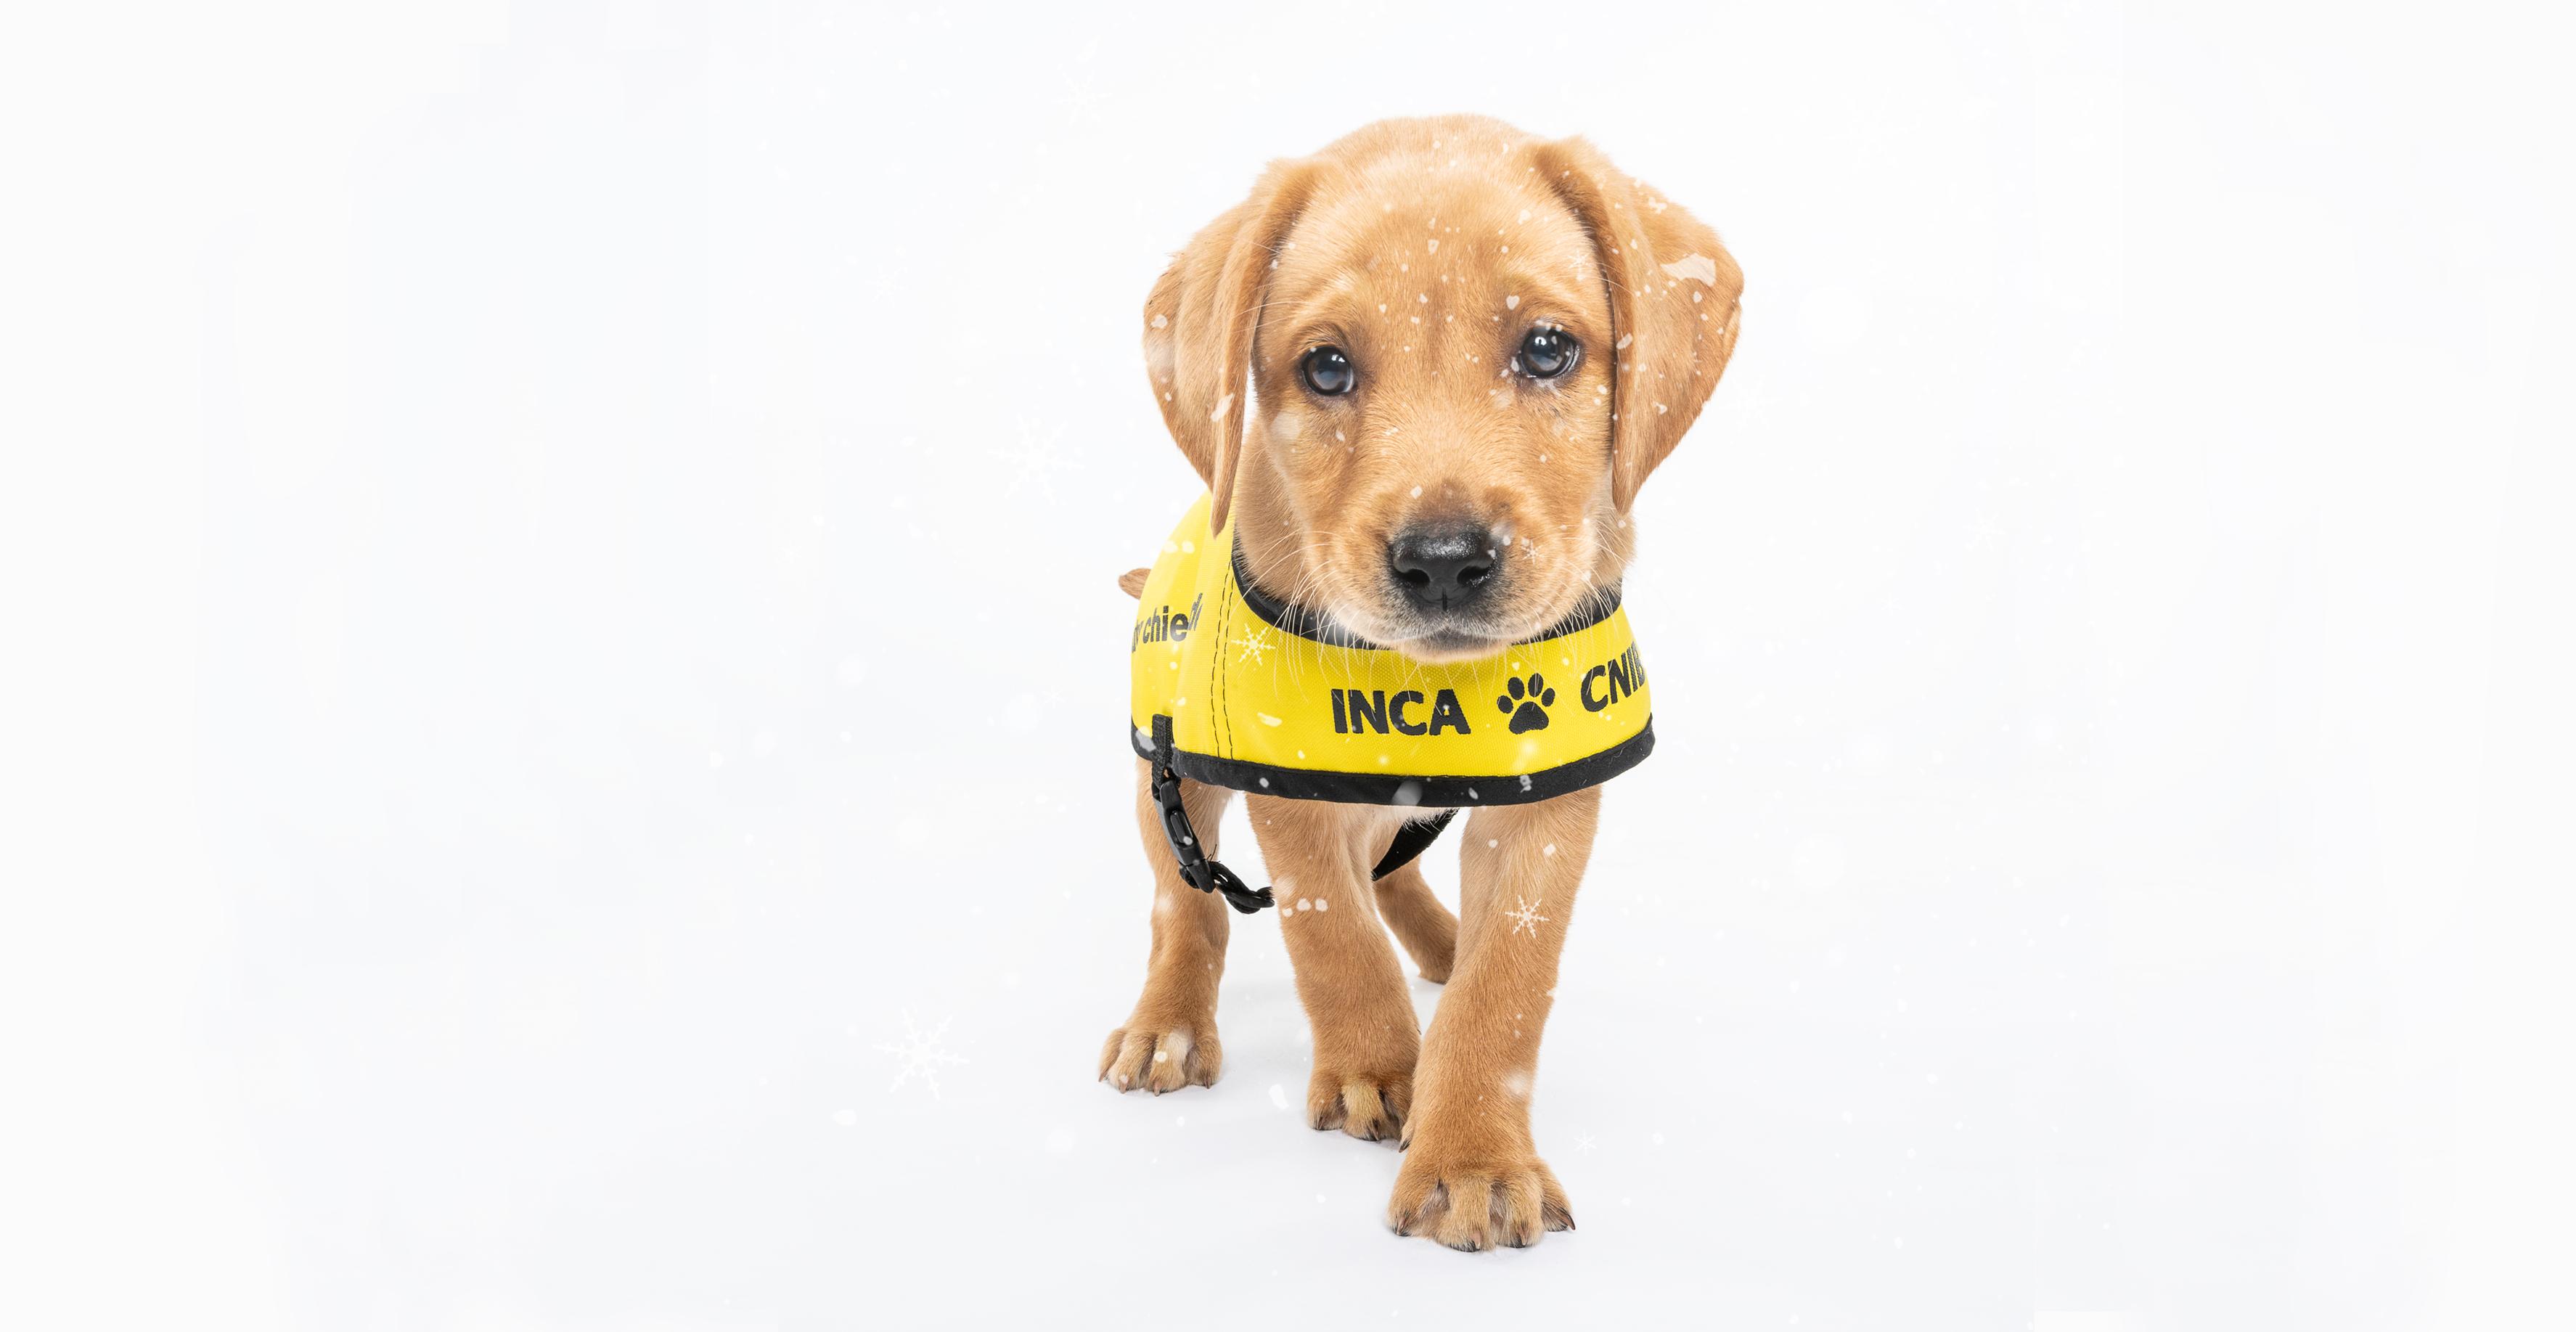 A puppy in a yellow Future CNIB Guide Dog vest looking at the camera with snow falling.